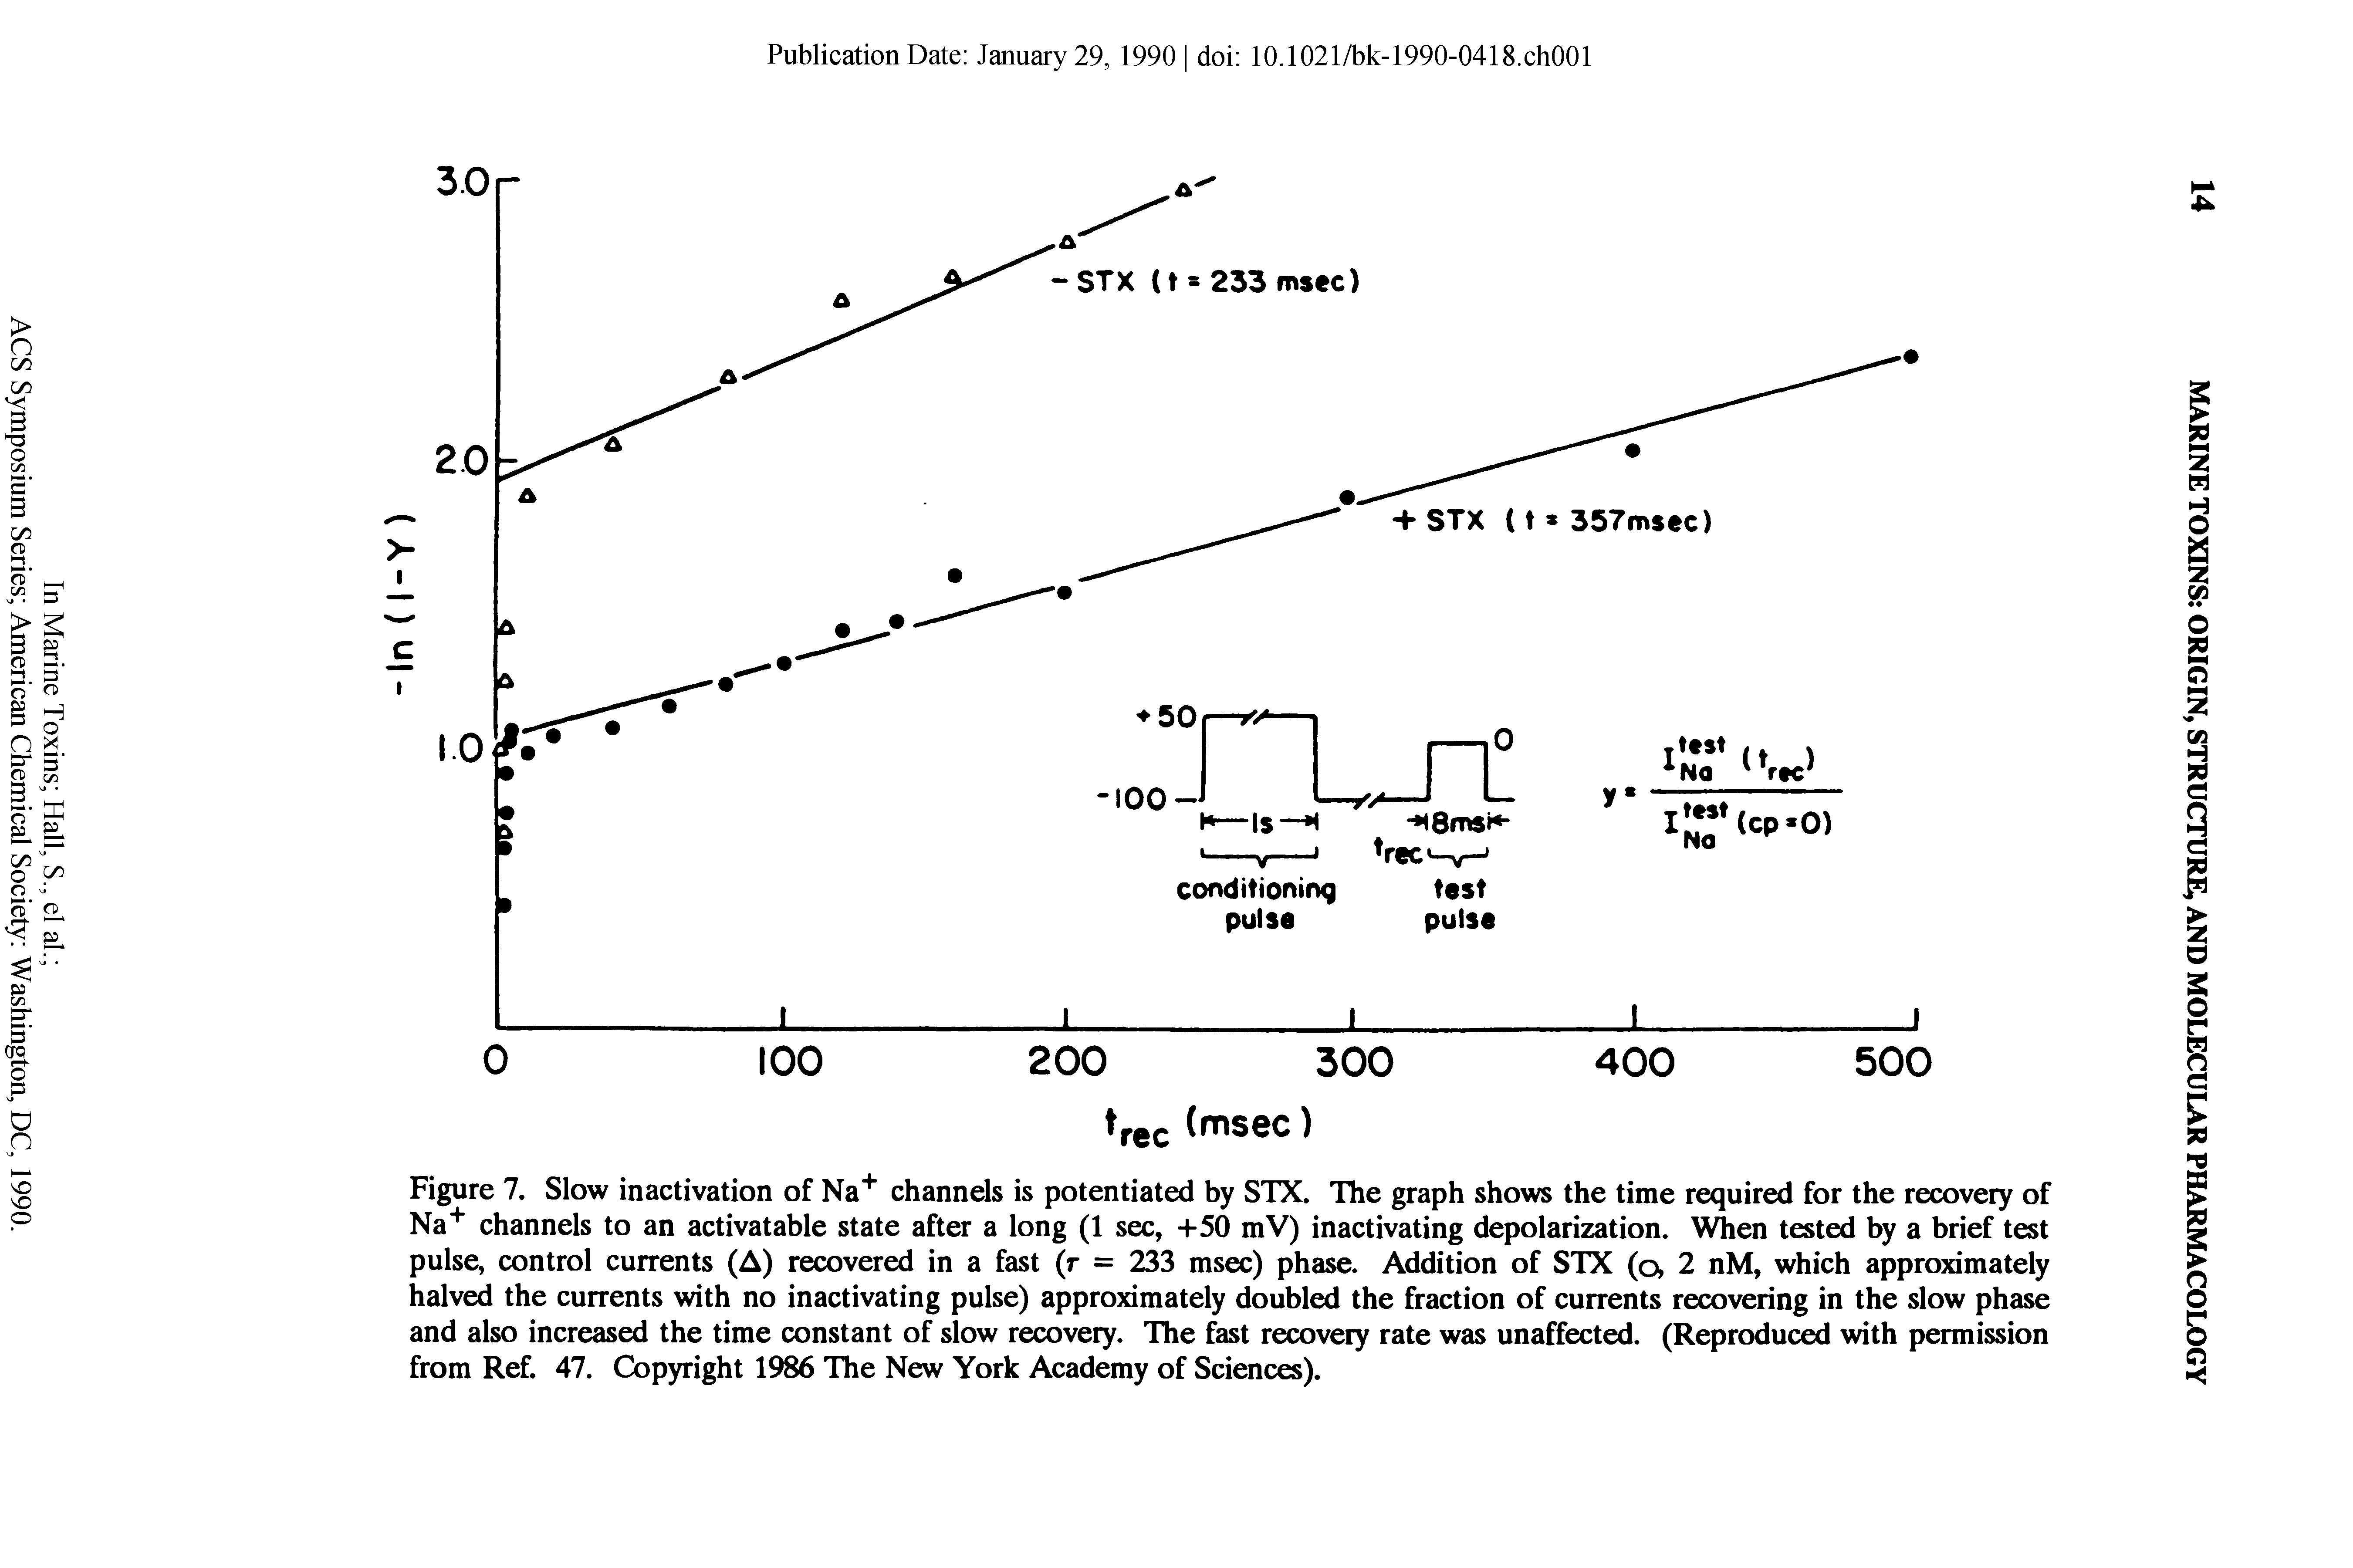 Figure 7. Slow inactivation of Na channels is potentiated by STX. The graph shows the time required for the recovery of Na channels to an activatable state after a long (1 sec, +50 mV) inactivating depolarization. When tested by a brief test pulse, control currents (A) recovered in a fast (r = 233 msec) phase. Addition of STX (q, 2 nM, which approximately halved the currents with no inactivating pulse) approximately doubled the fraction of currents recovering in the slow phase and also increased the time constant of slow recovery. The fast recovery rate was unaffected. (Reproduced with permission from Ref. 47. Copyright 1986 The New York Academy of Sciences).